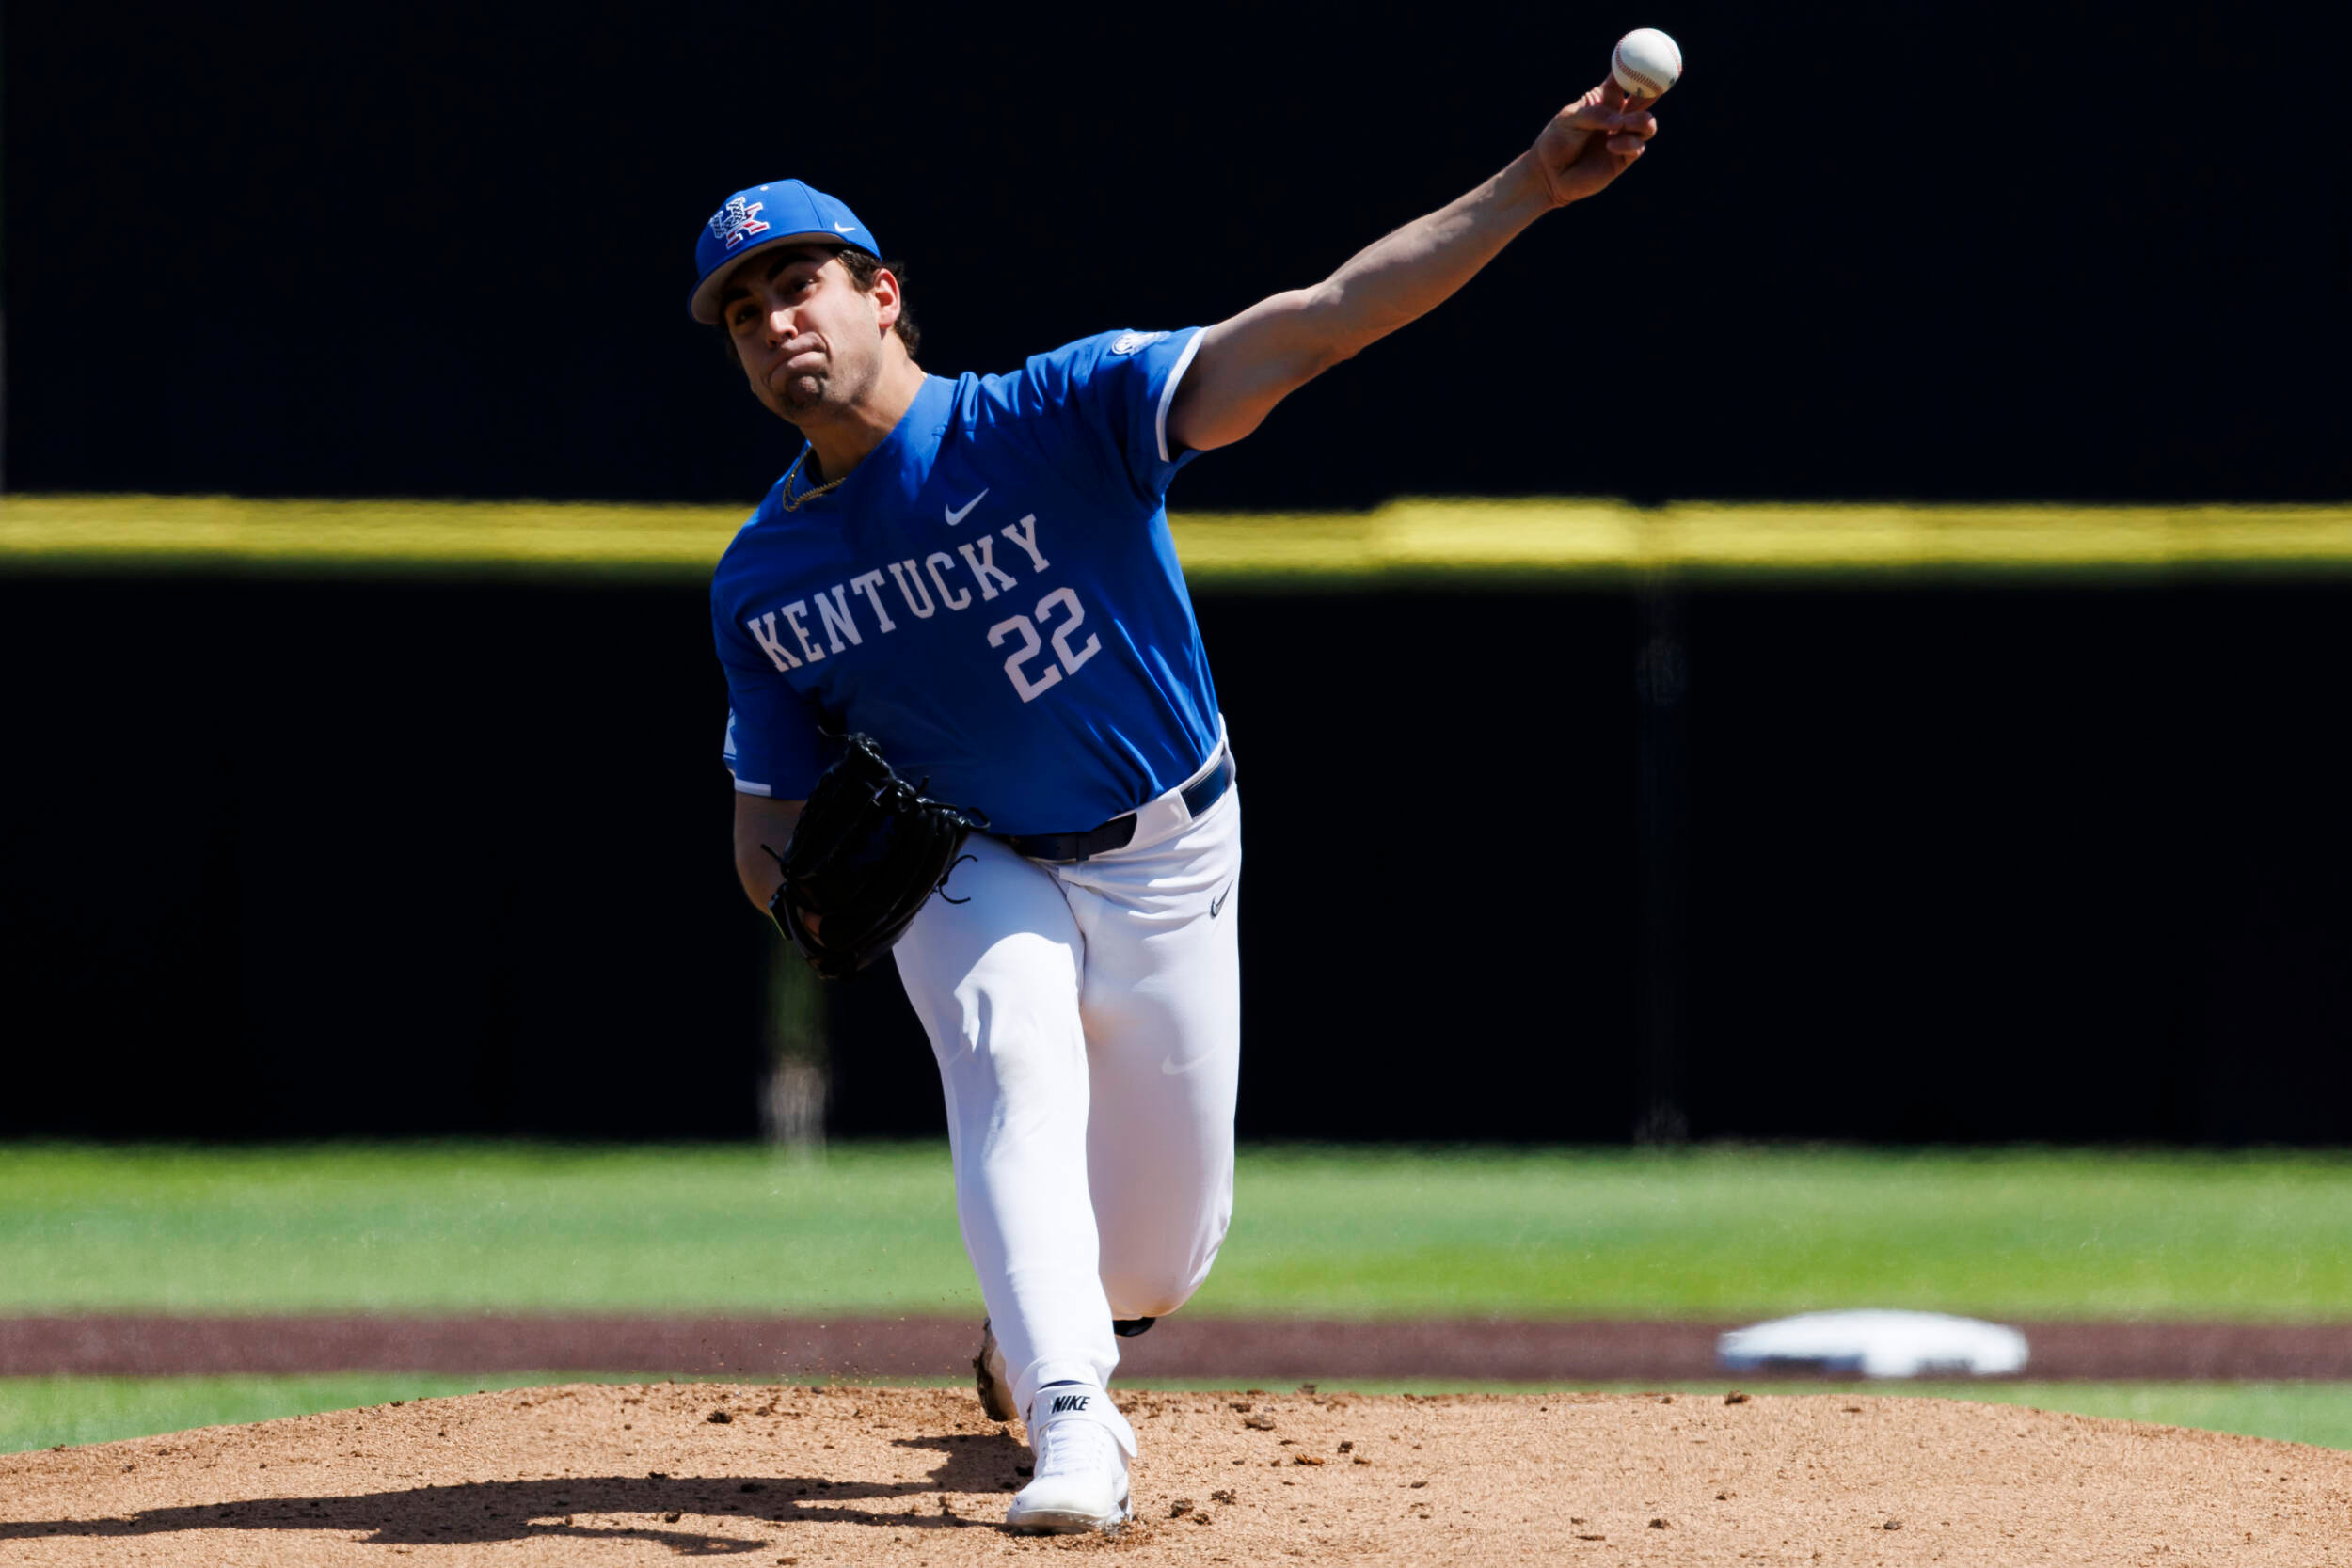 The End is Ni(man): Dom Niman’s Complete Game Shutout Leads No. 12 Kentucky